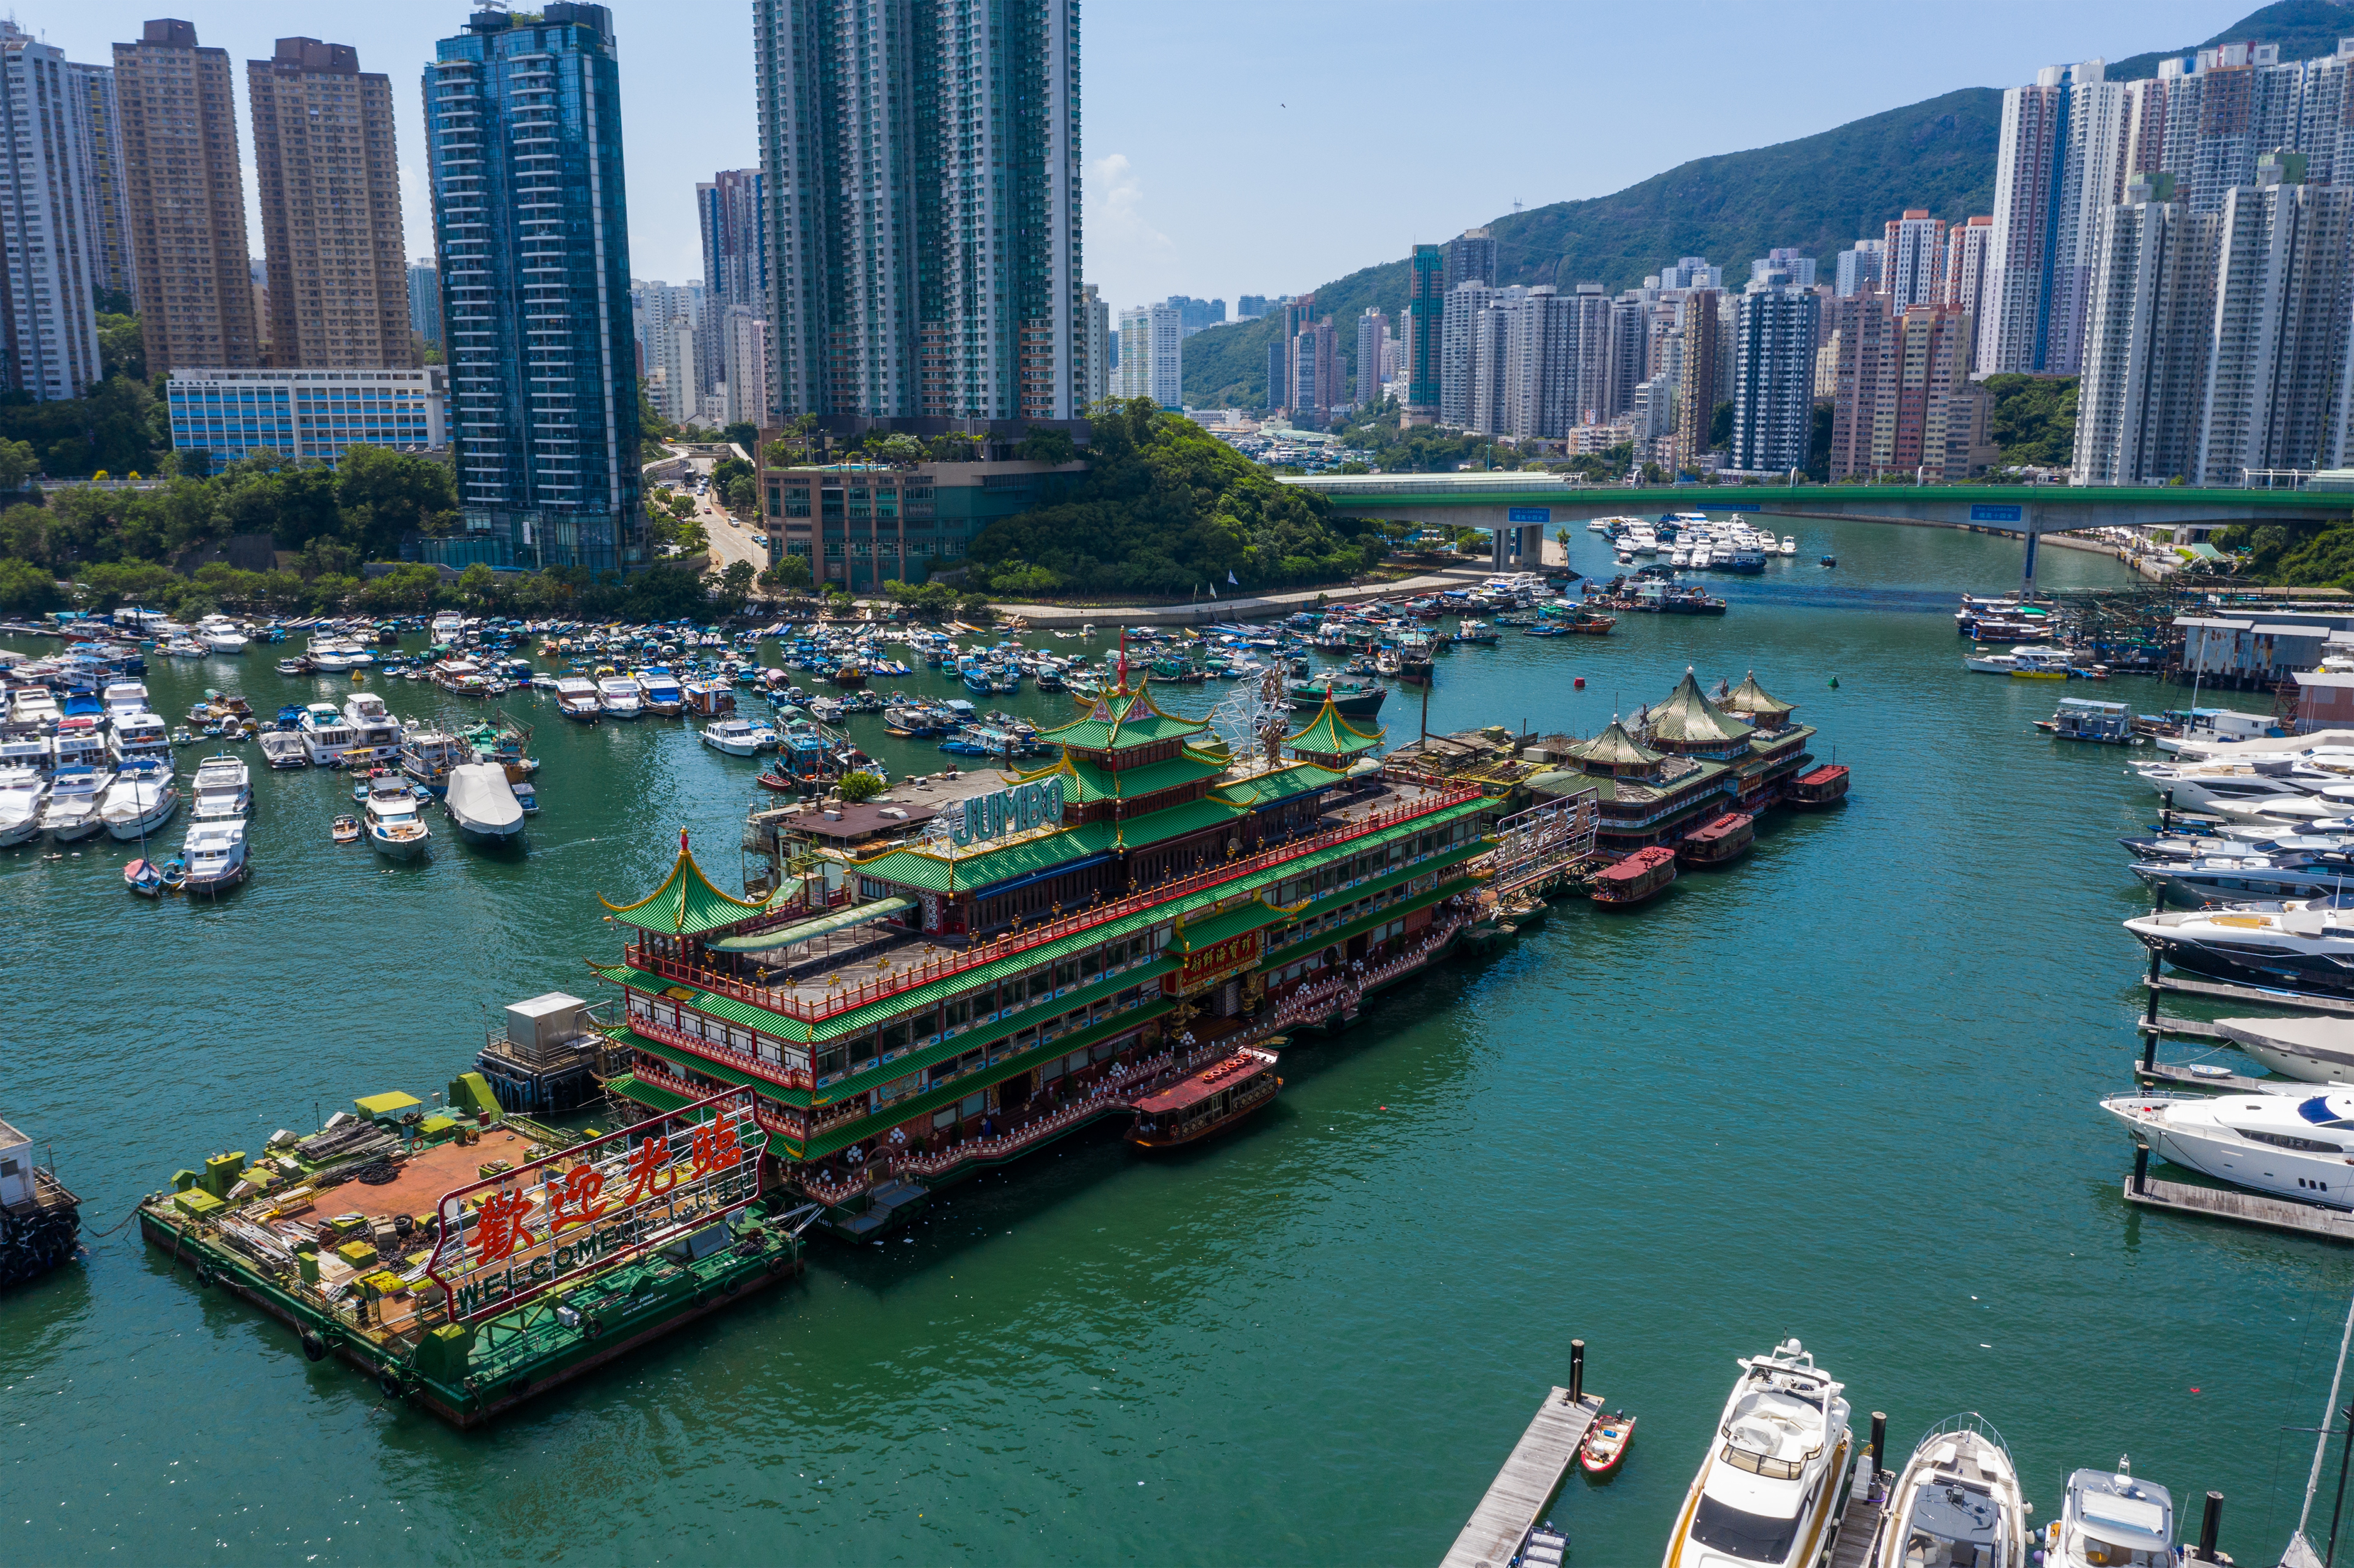 Hong Kong&#39;s Iconic Jumbo Floating Restaurant Sinks In South China Sea